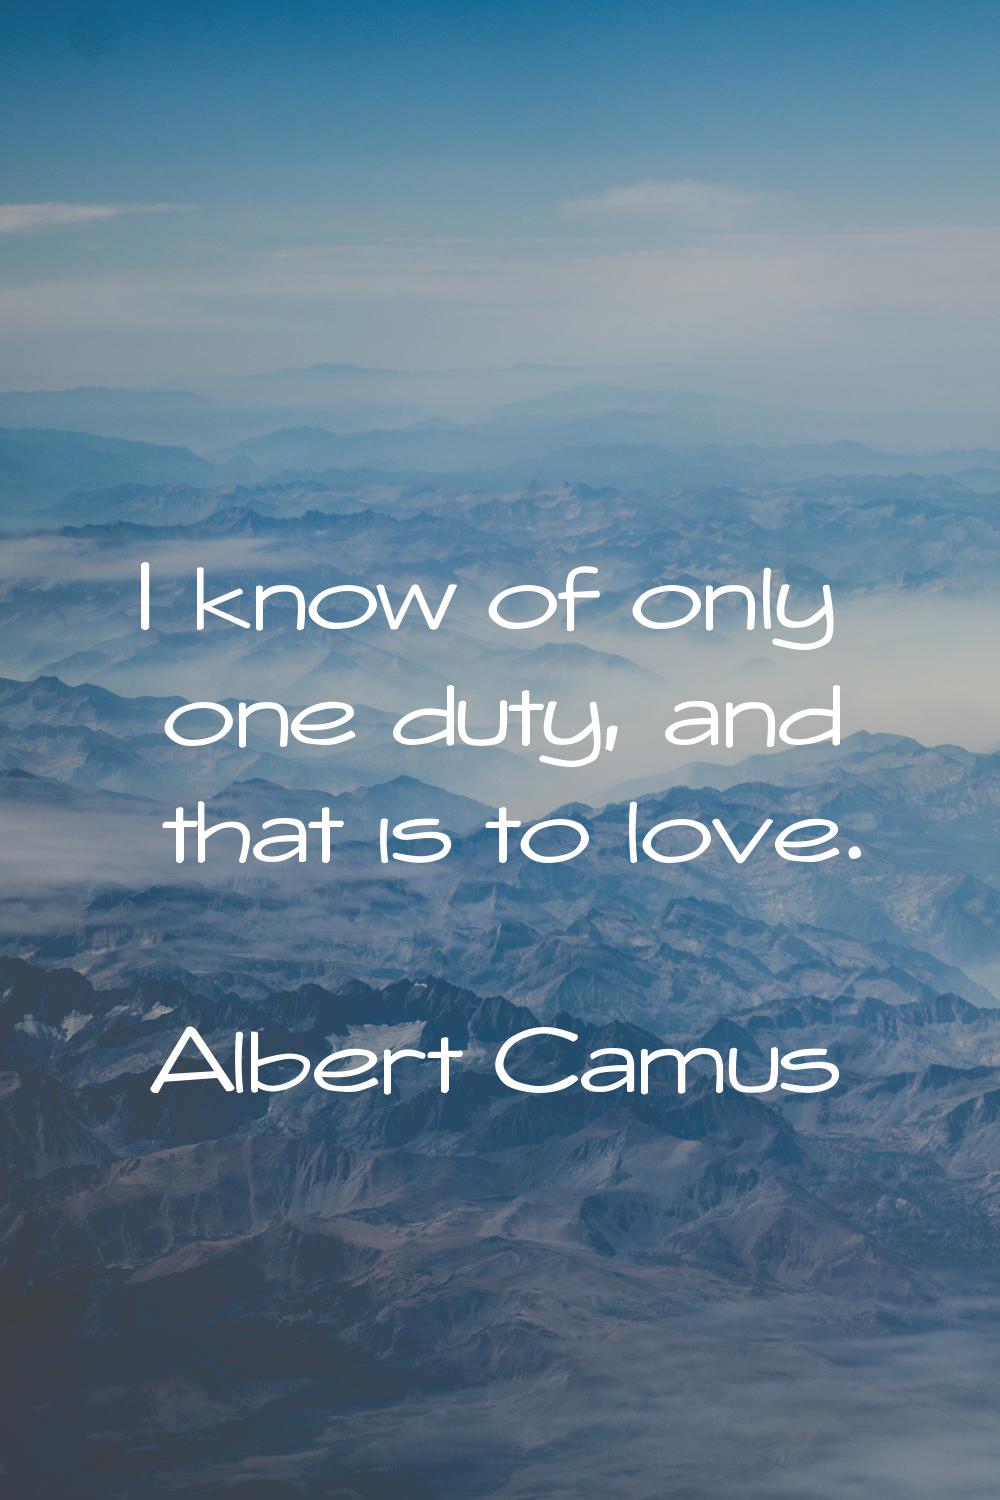 I know of only one duty, and that is to love.